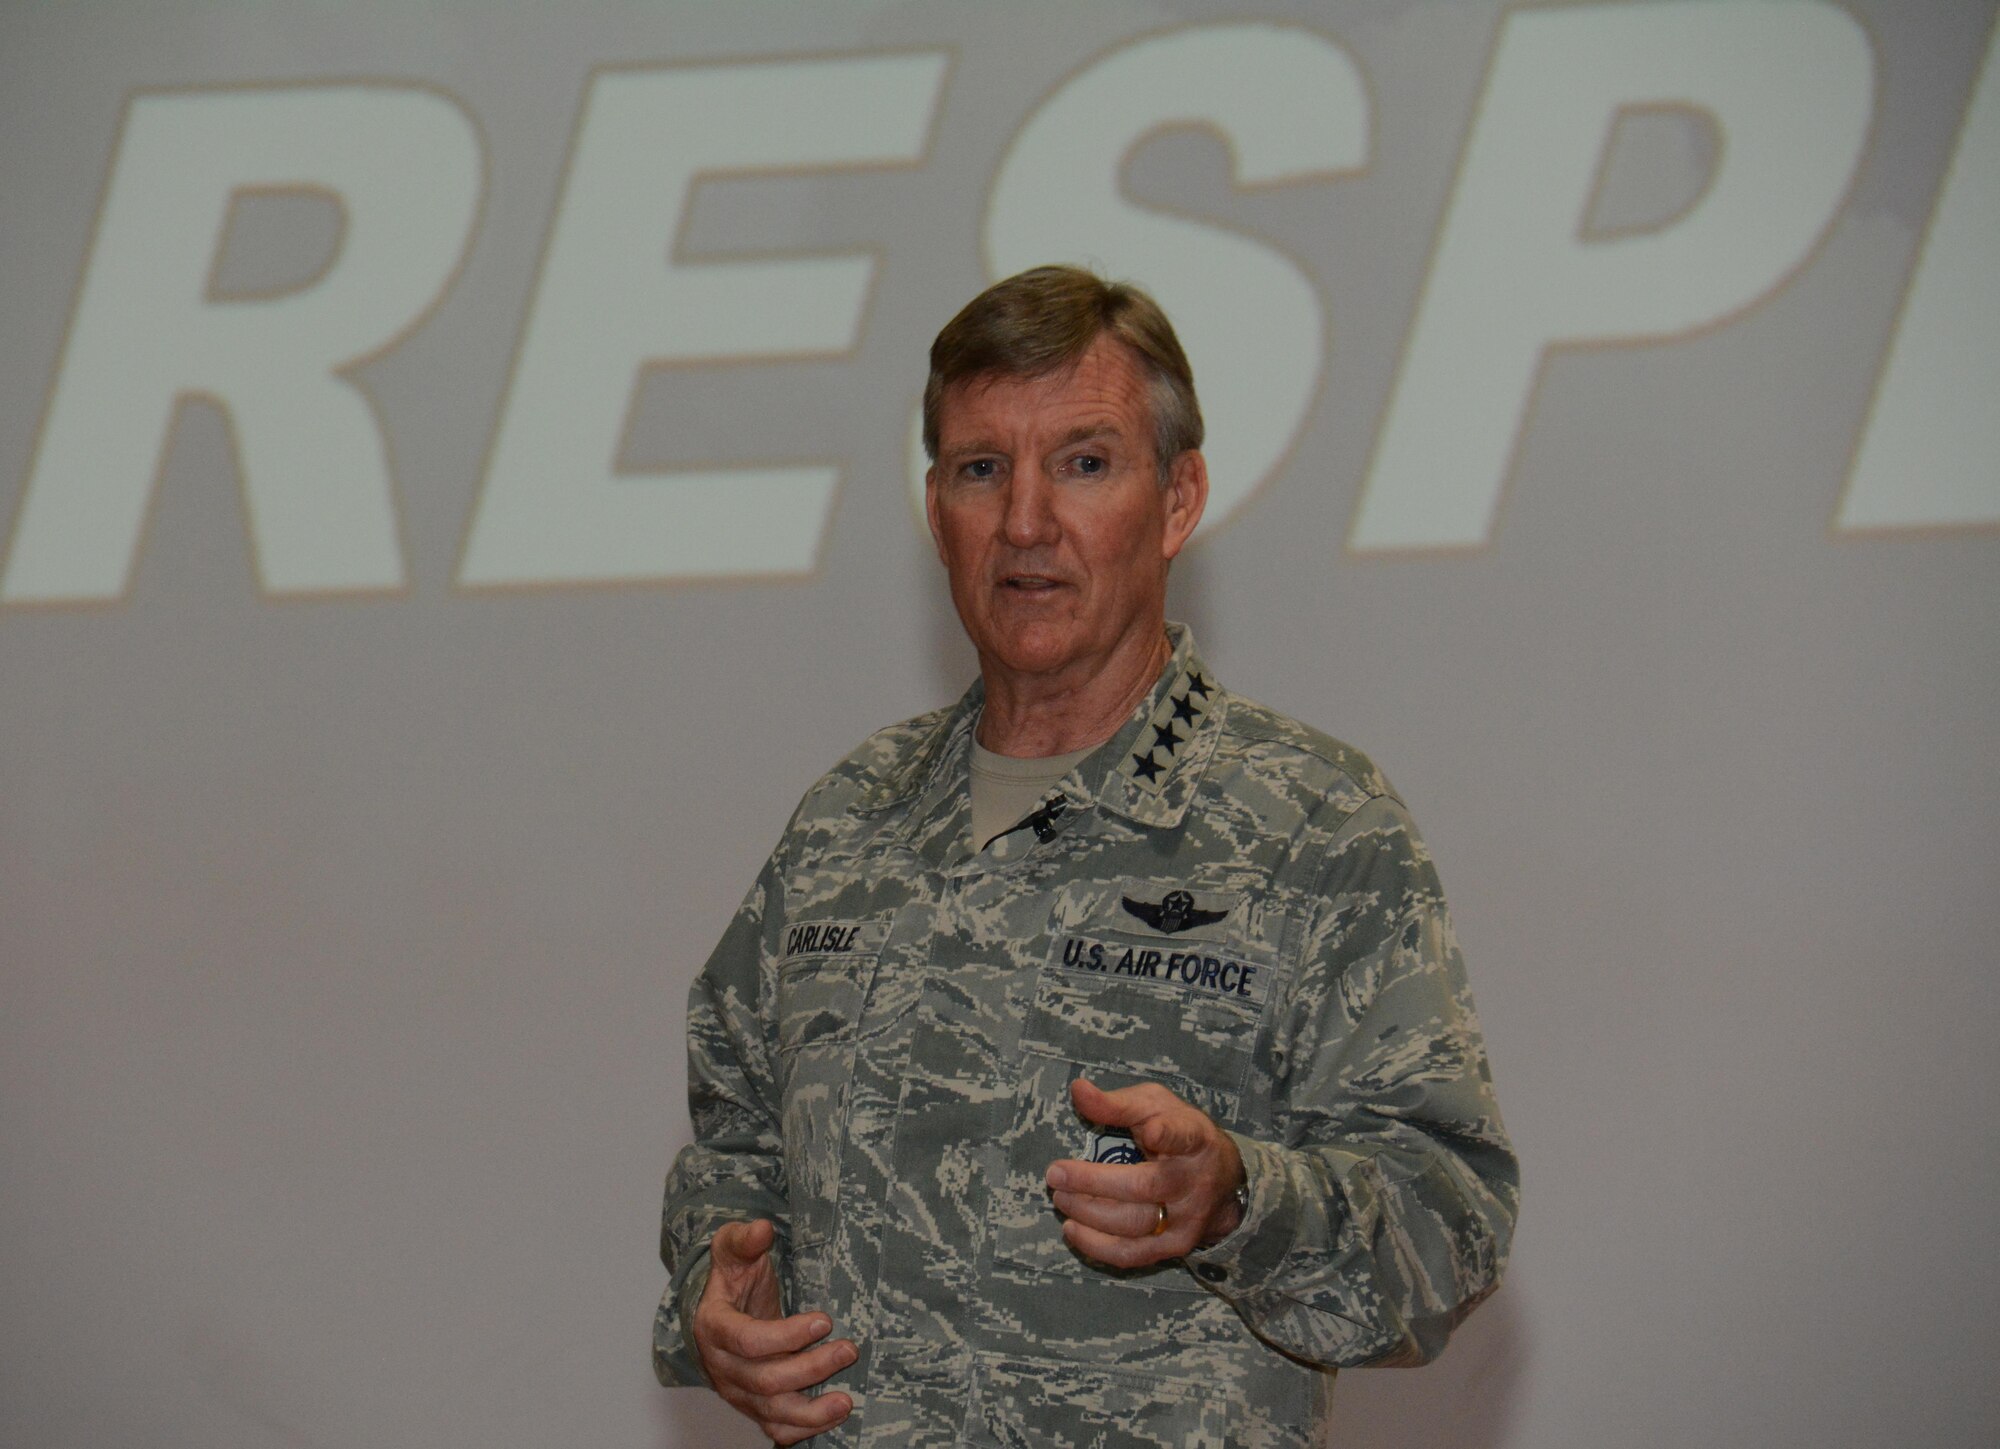 U.S. Air Force Gen. Hawk Carlisle, commander of Air Combat Command, shares his perspective on respect with more than 300 members of Al Udeid Air Base, Qatar during an all-call event at the Coalition Compound Theater Oct. 21, 2015. During the all-call, Carlisle also stressed the importance of being innovative and resilient and thanked every service member for their dedication to the mission. (U.S. Air Force photo by Tech. Sgt. James Hodgman/Released)